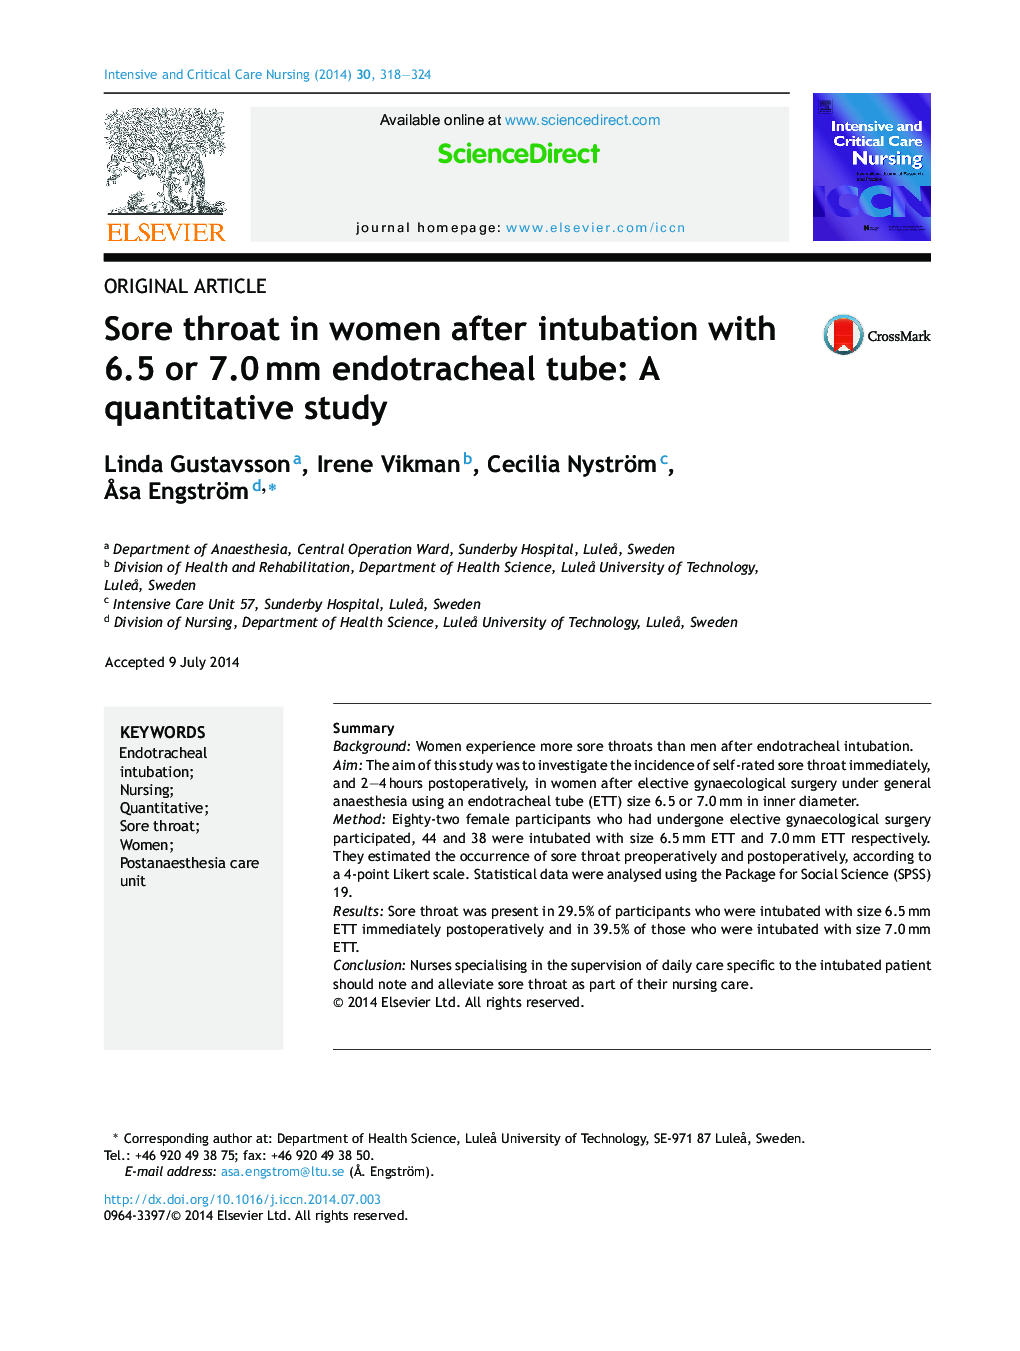 Sore throat in women after intubation with 6.5 or 7.0 mm endotracheal tube: A quantitative study